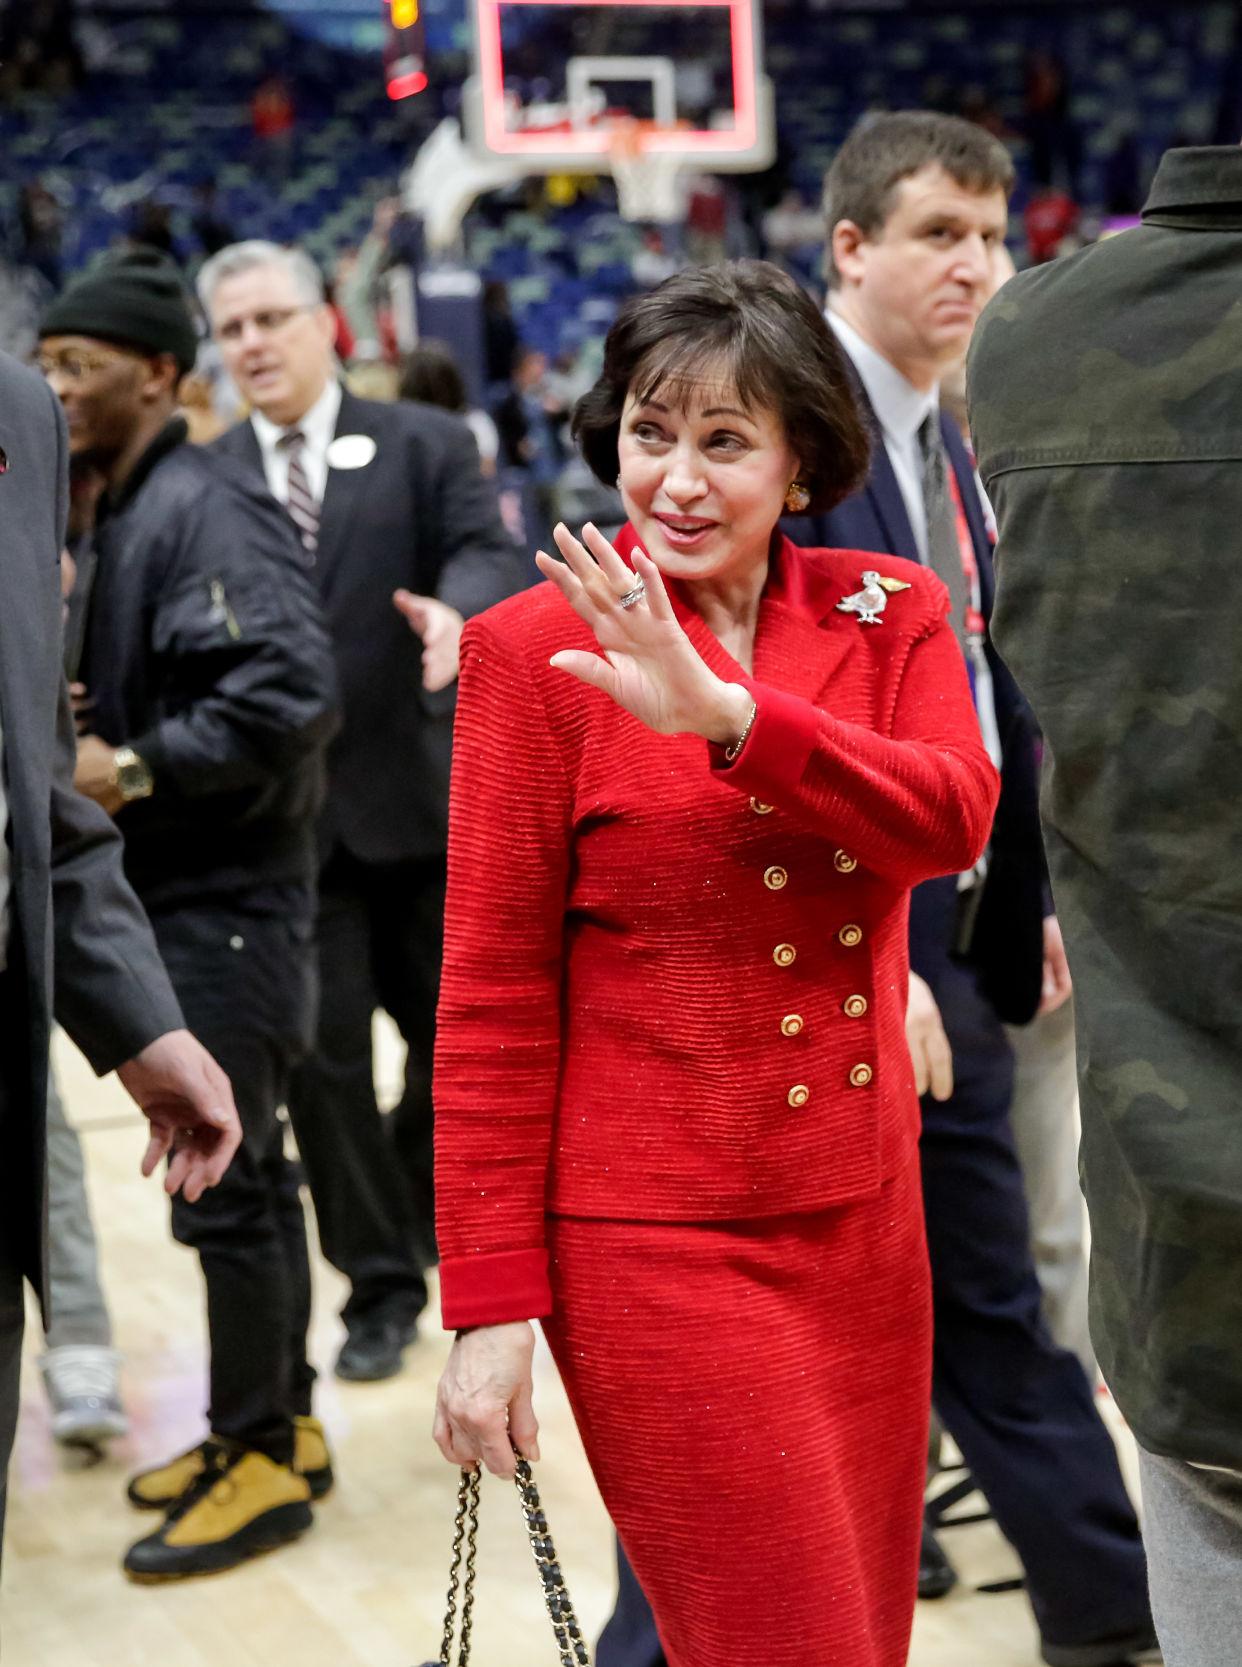 Jeff Van Gundy says Gayle Benson should stand up to NBA, disses local reporters during ESPN broadcast